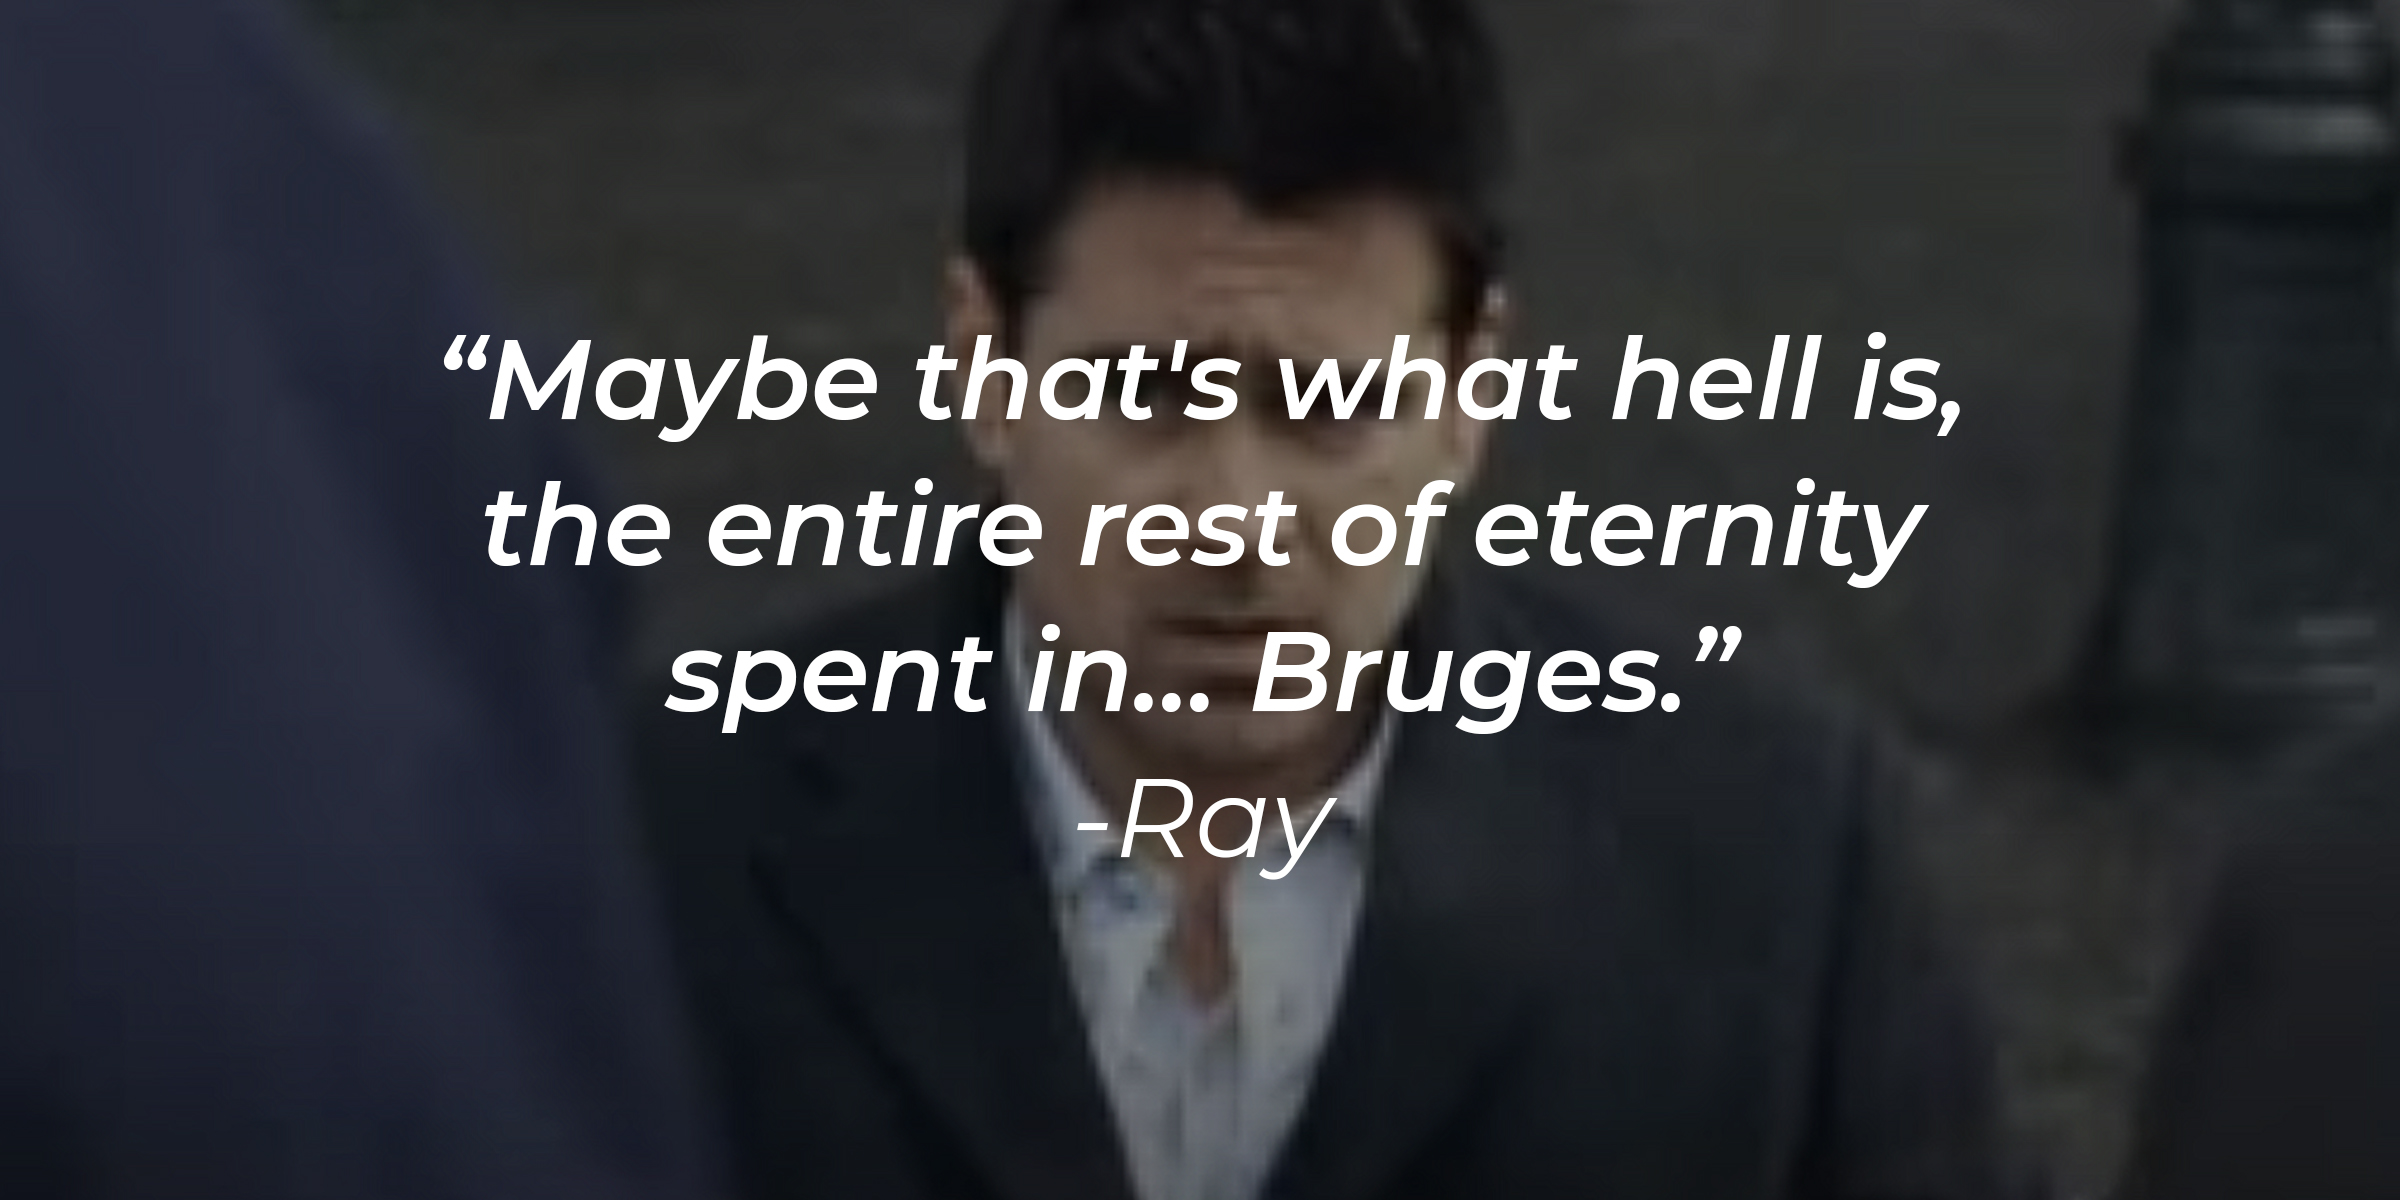 Ray with his quote: "Maybe that's what hell is, the entire rest of eternity spent in… Bruges." | Source: Youtube.com/FocusFeatures